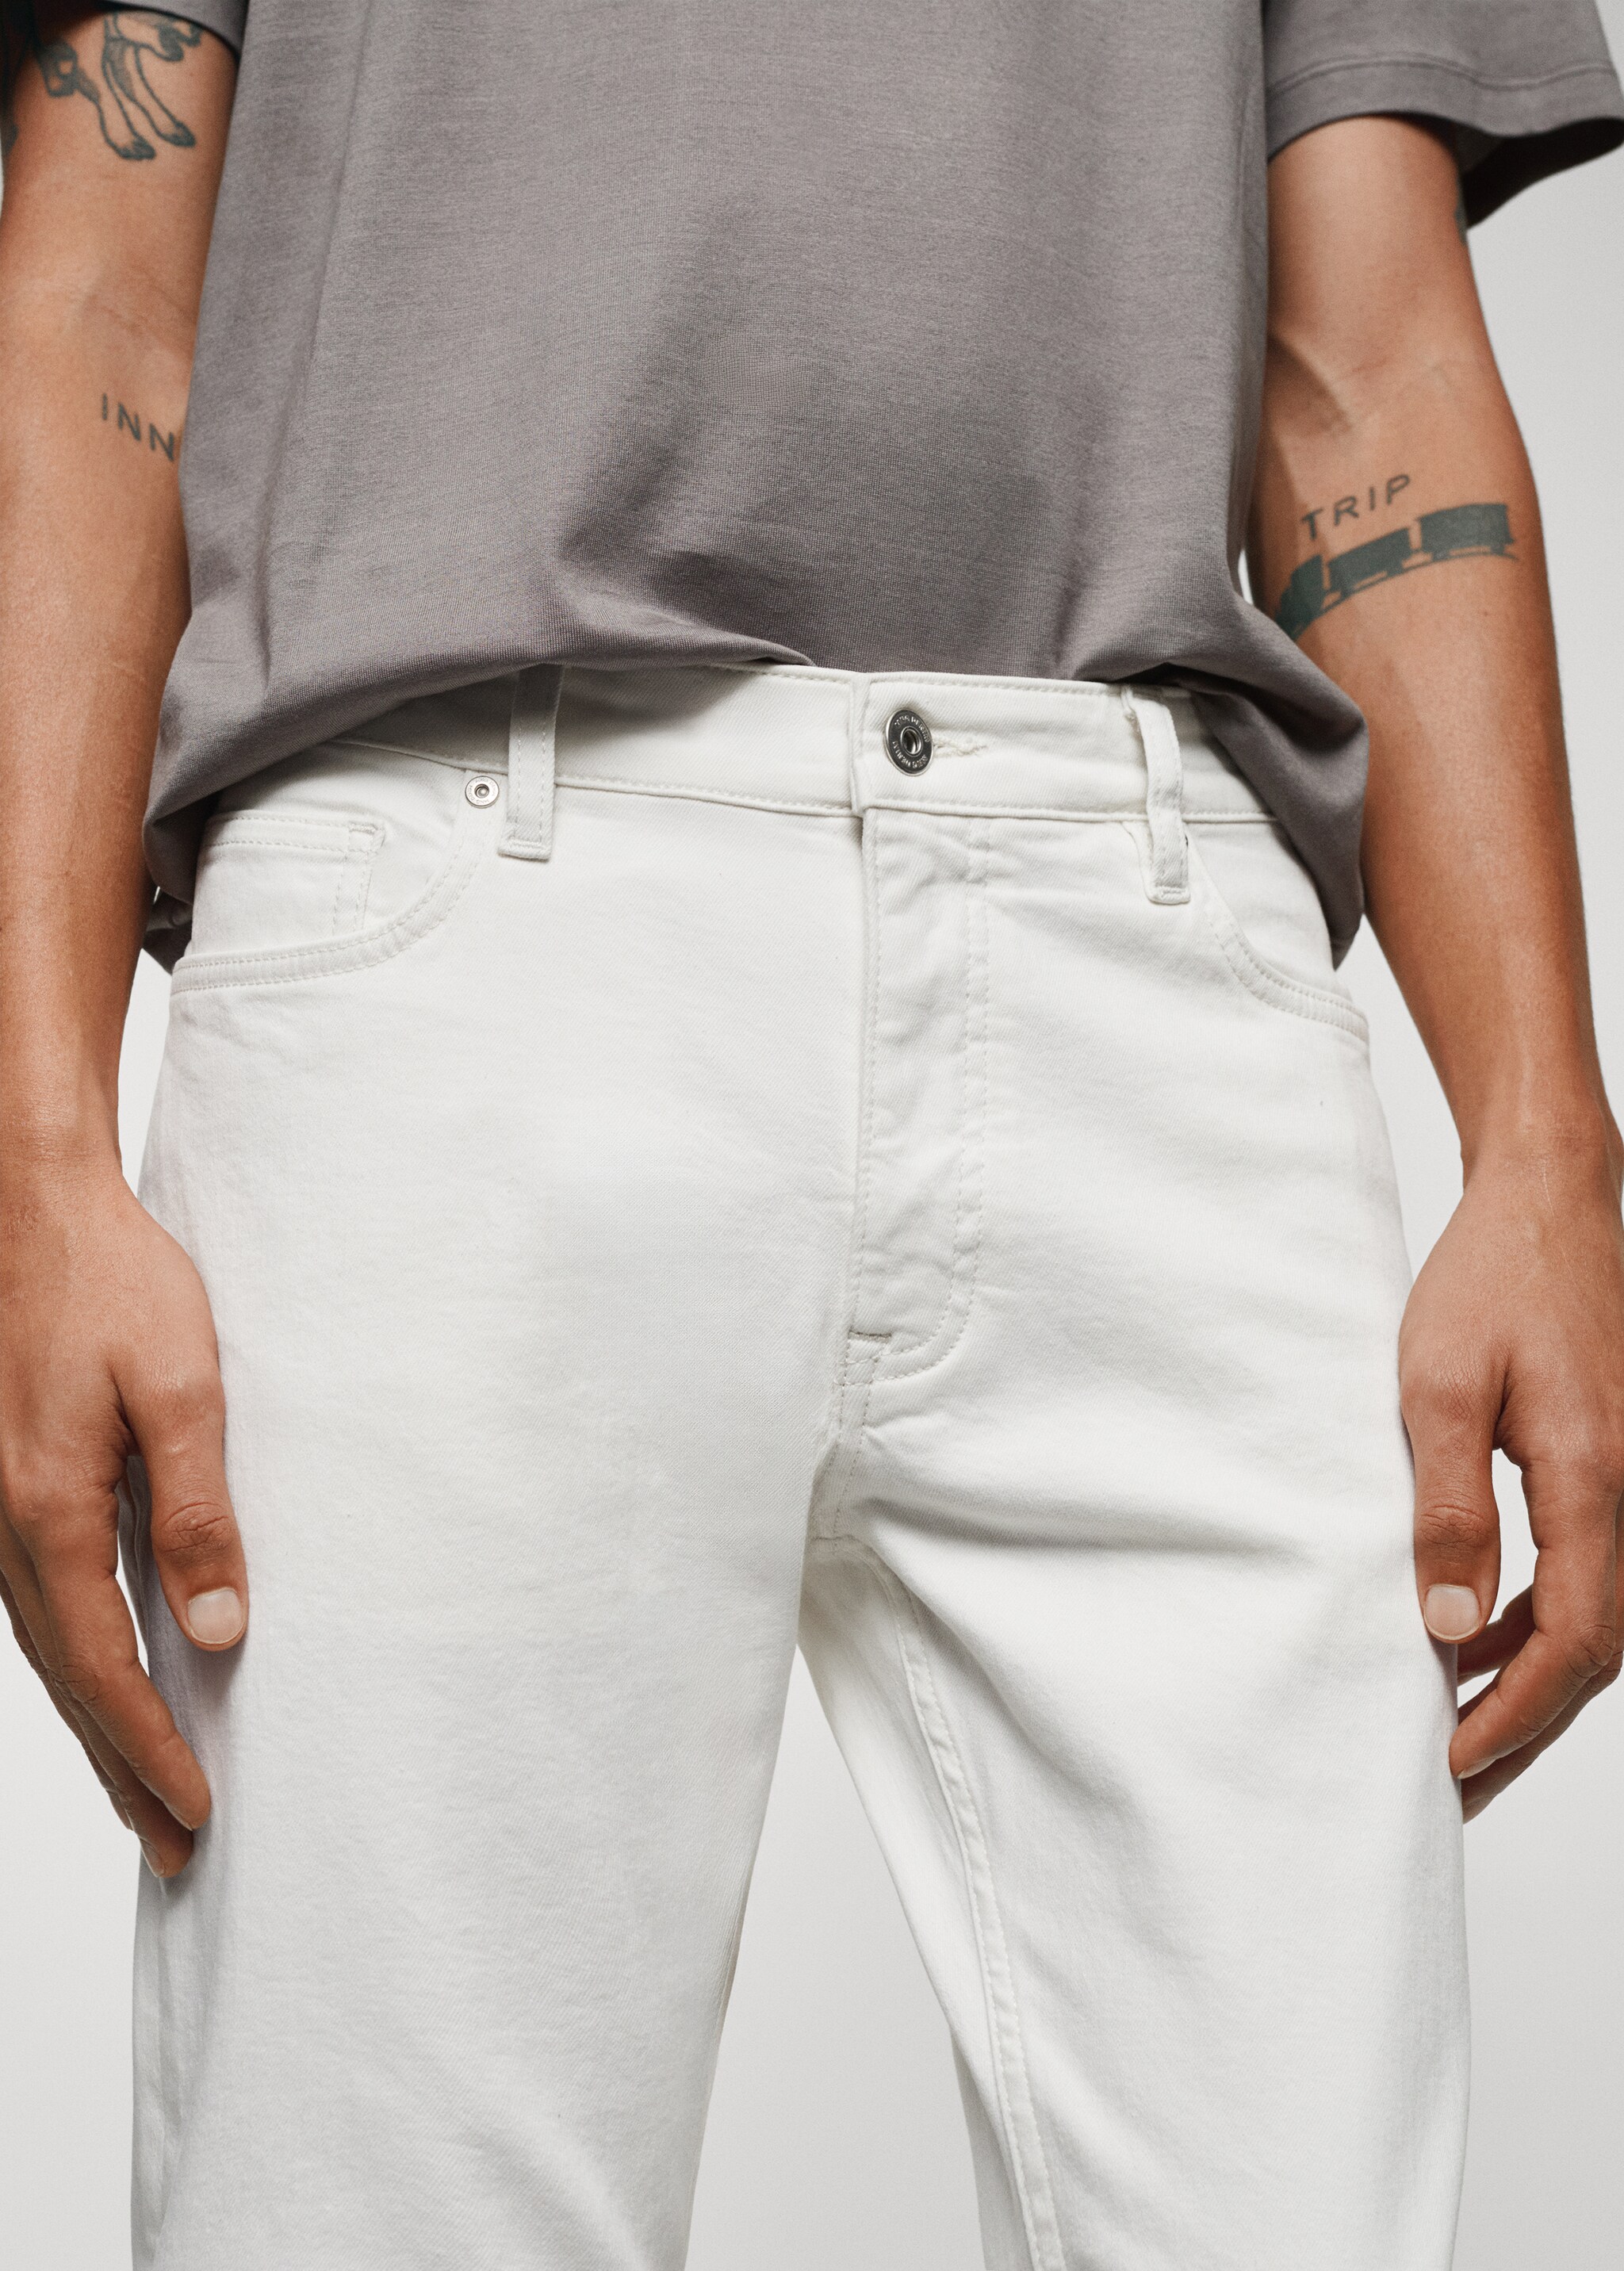 Billy skinny jeans - Details of the article 1